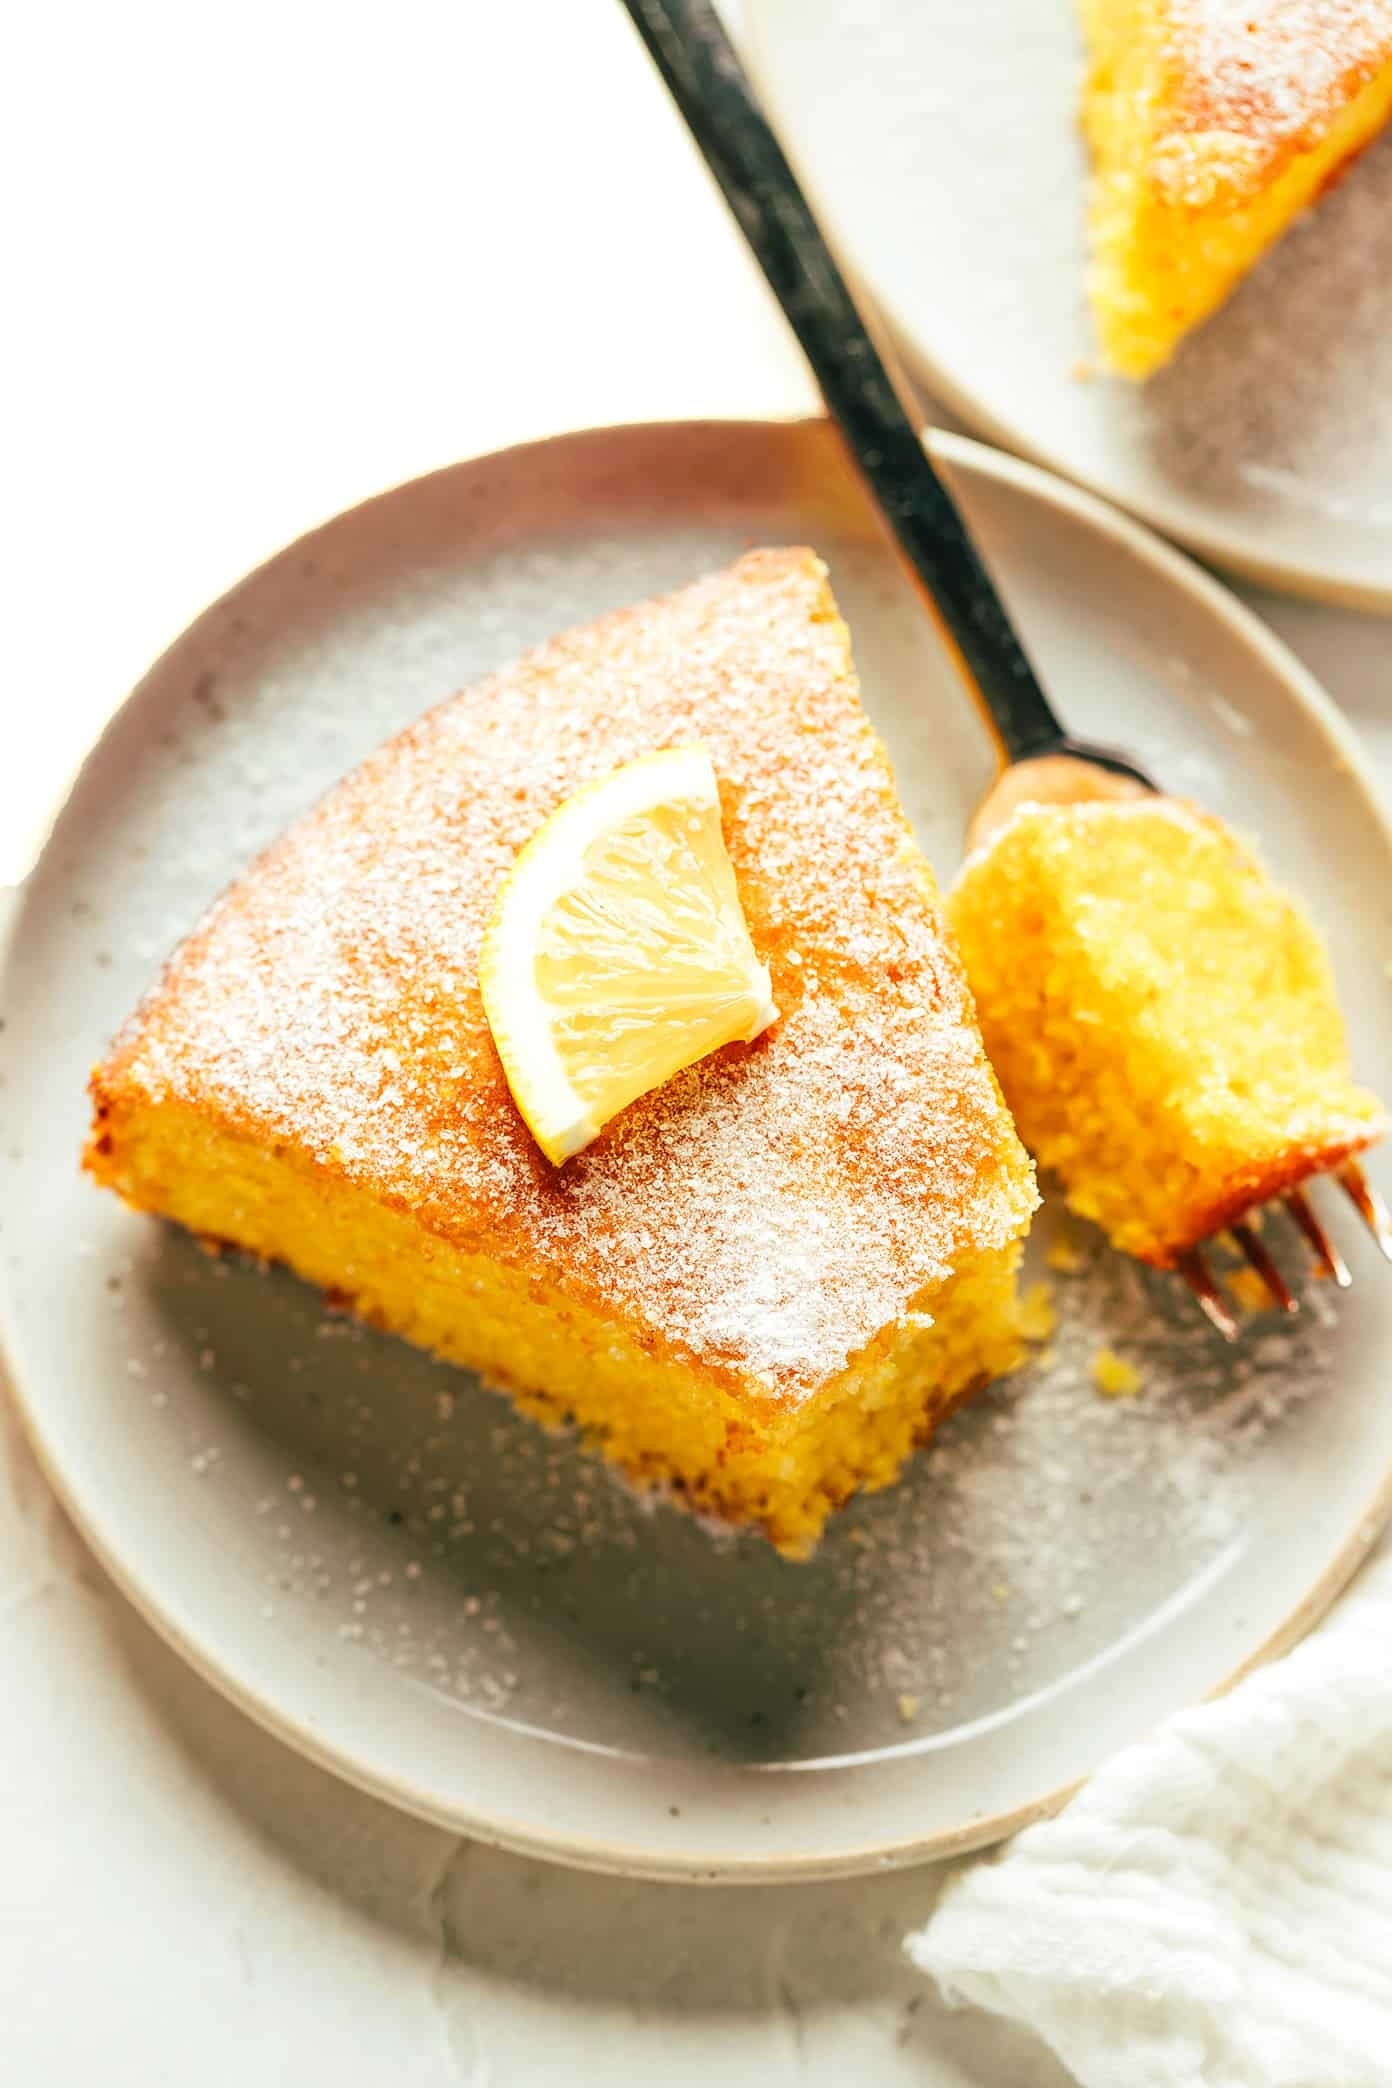 a slice of citrus olive oil cake dusted with sugar and topped with a lemon slice